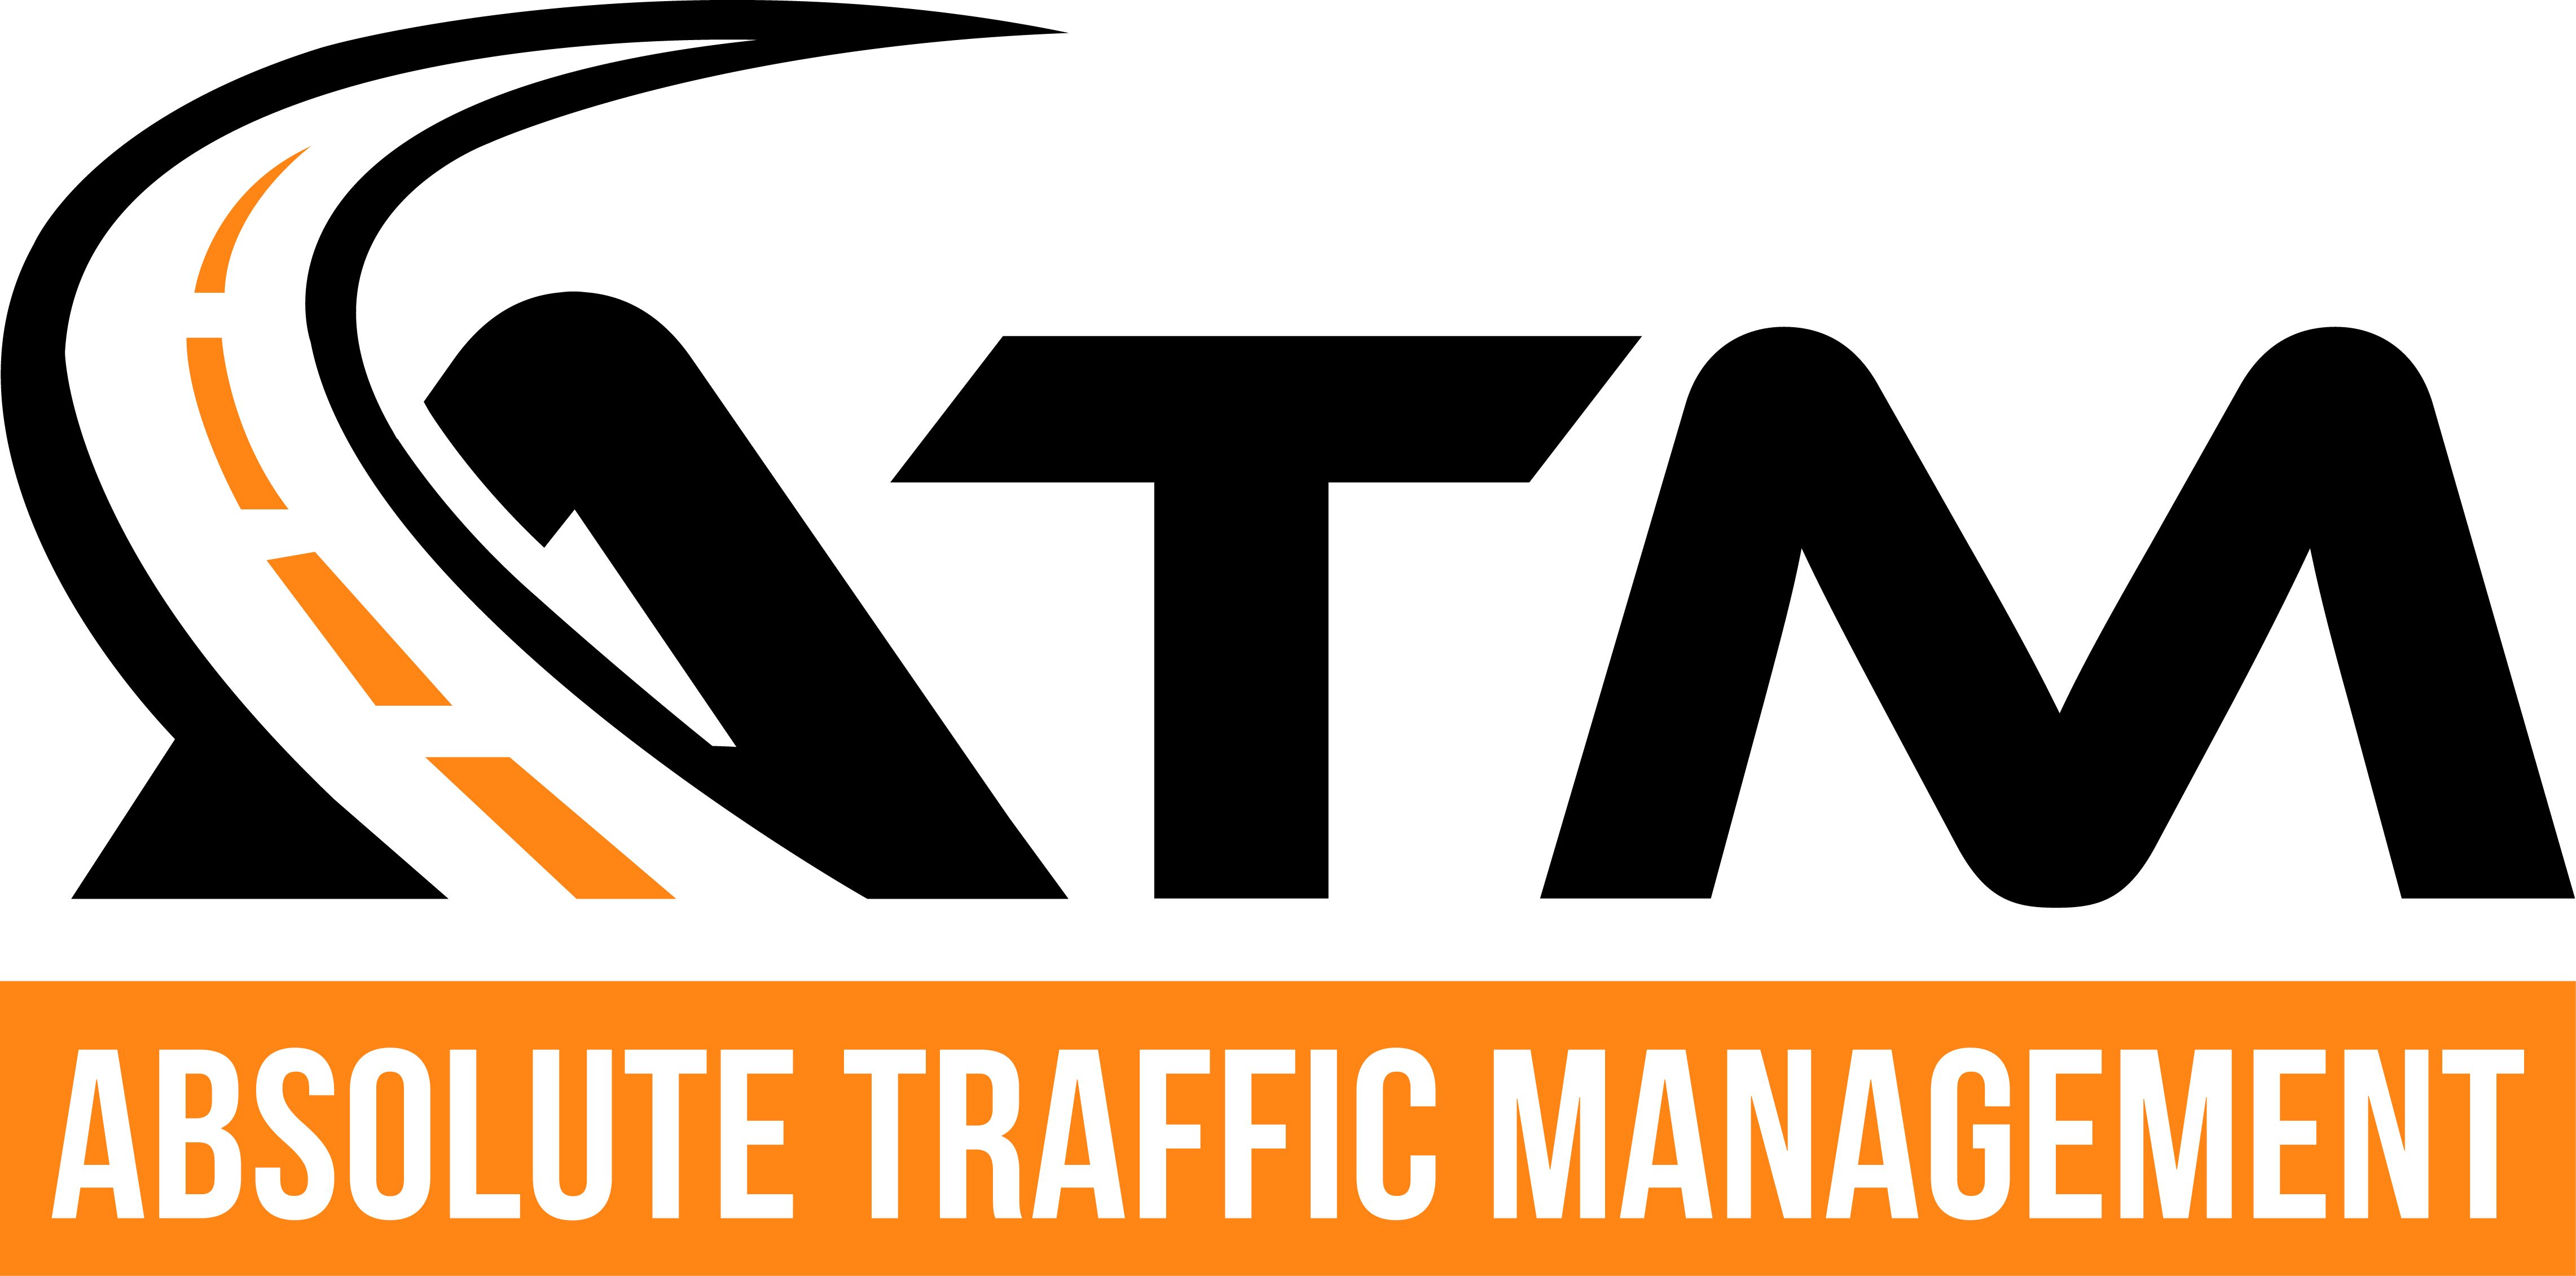 Absolute Traffic Management